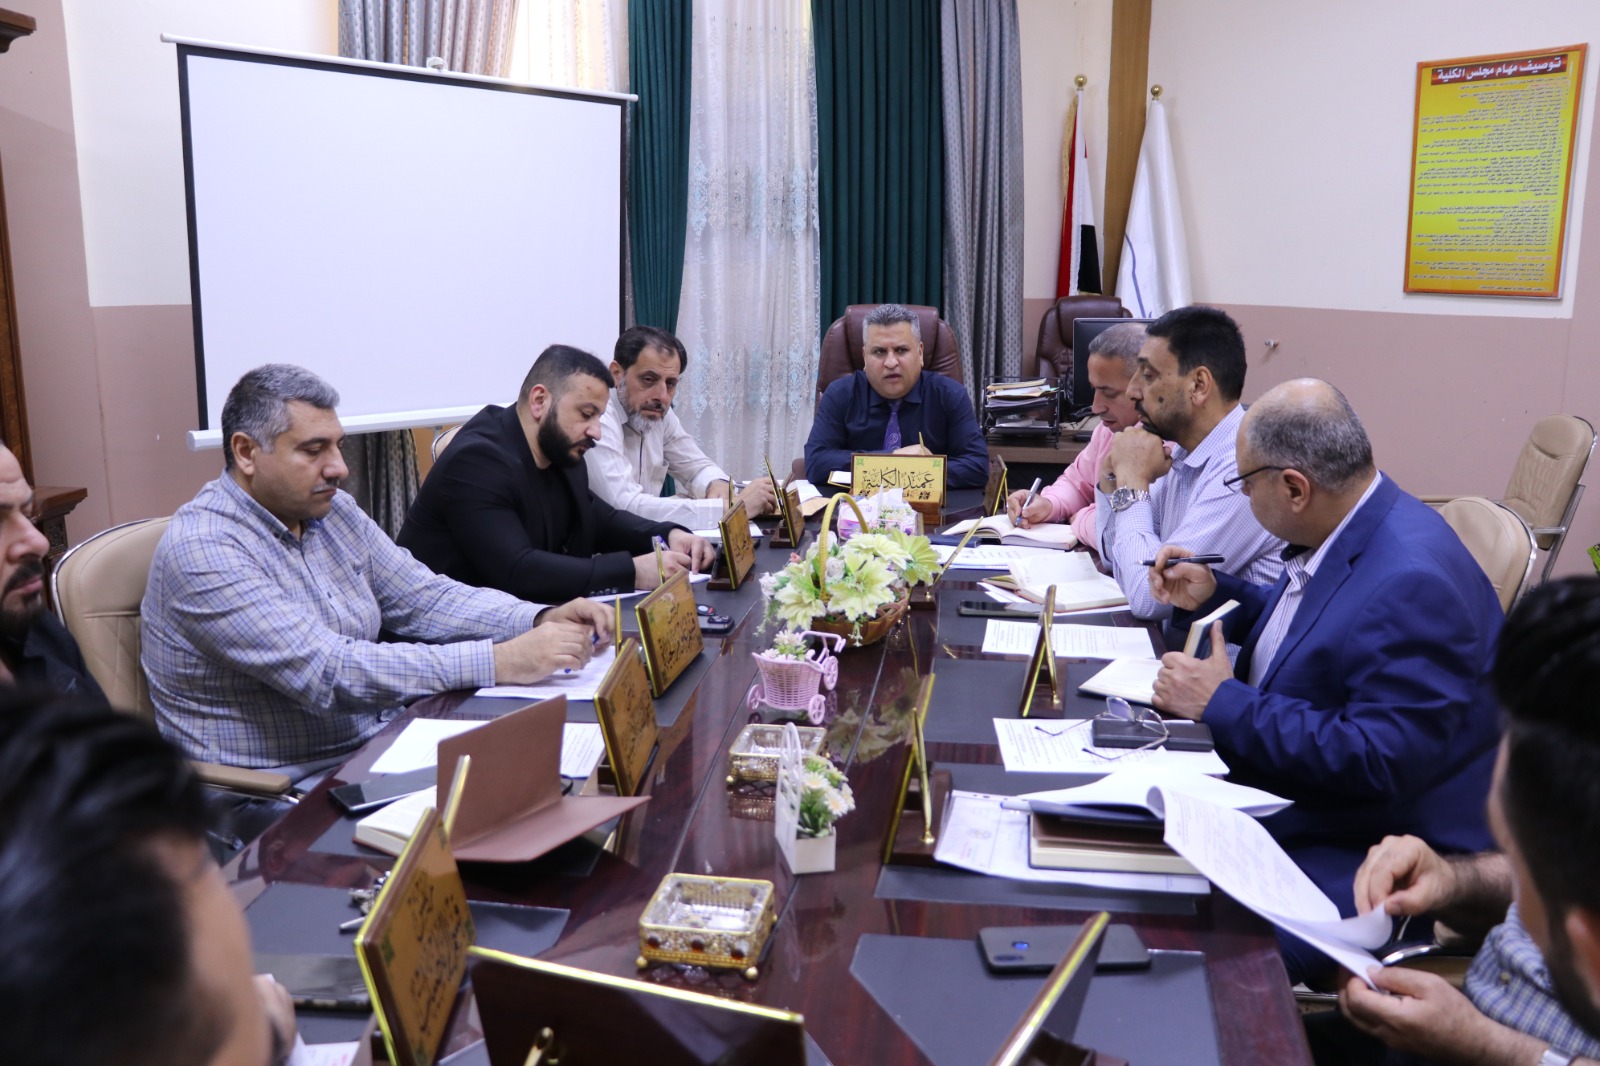 The sixth session of the College of Science Council was held